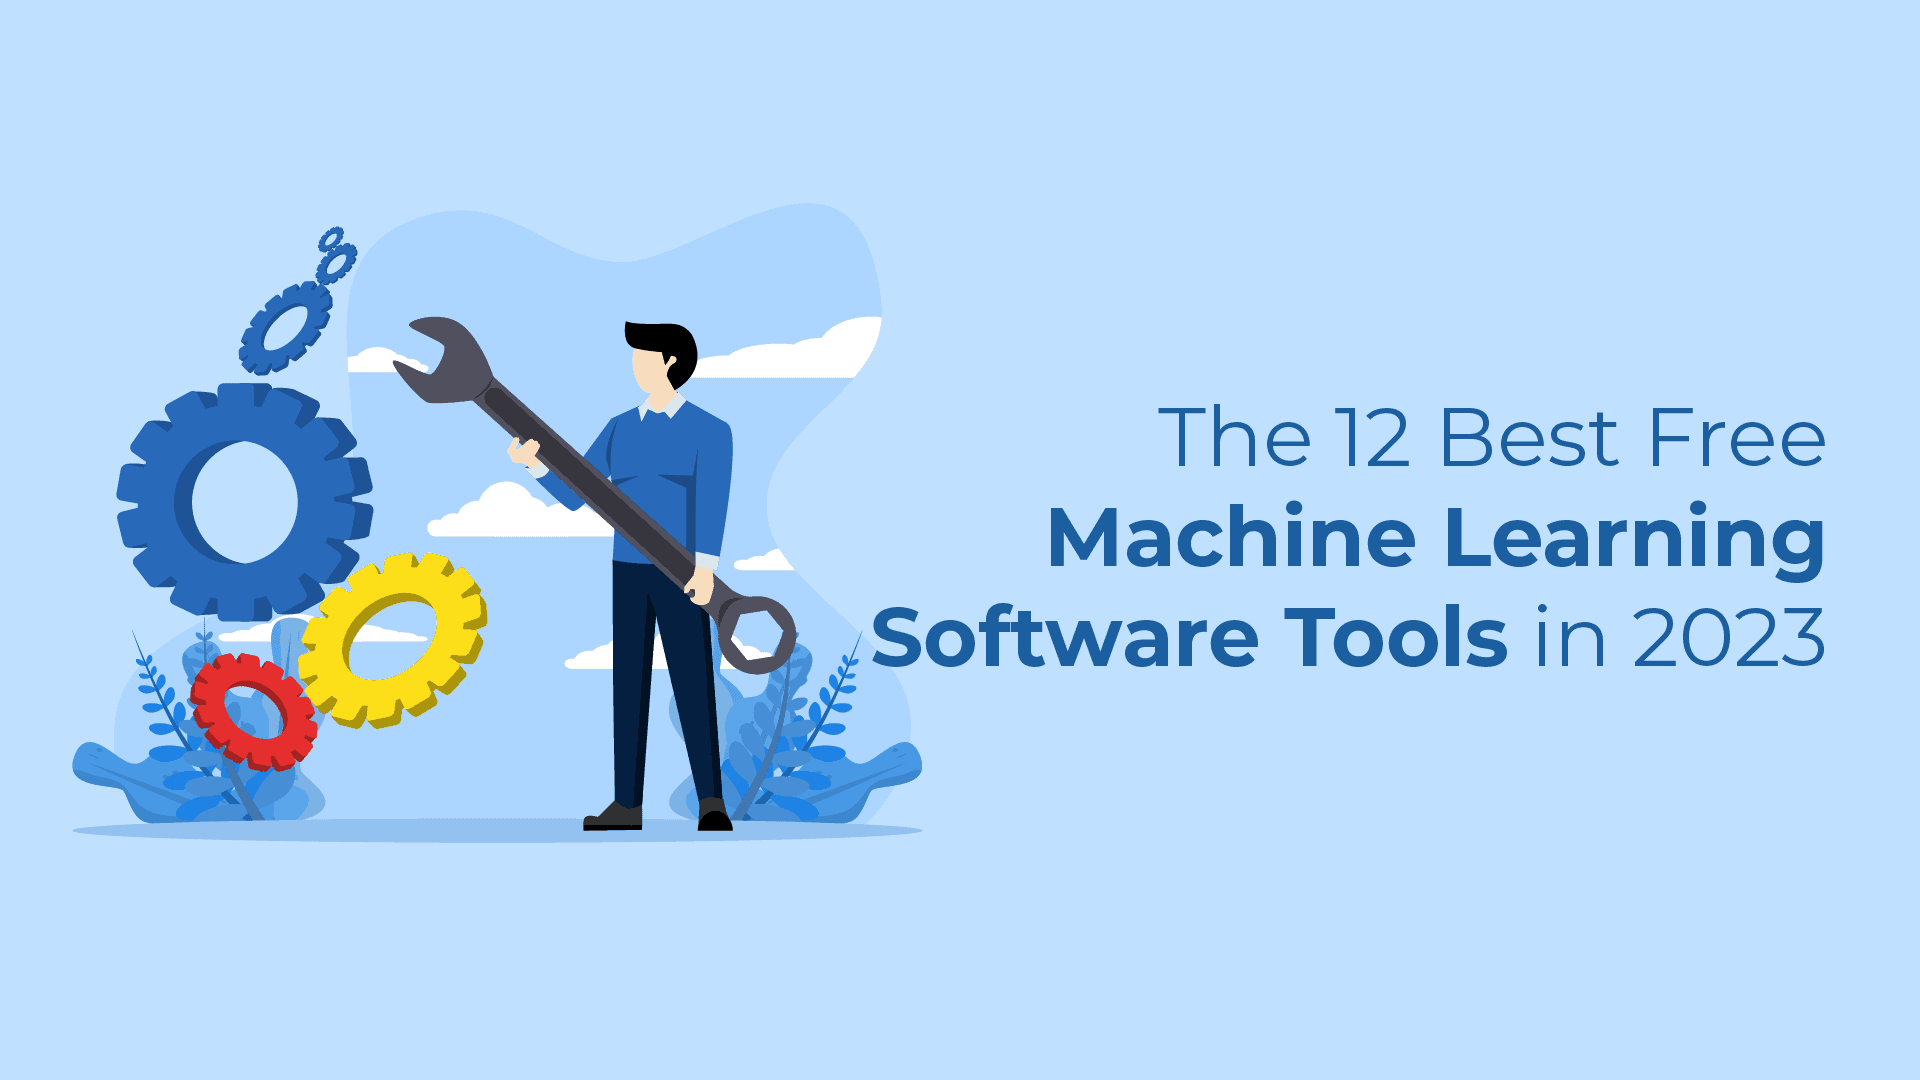 The 12 Best Free Machine Learning Software Tools